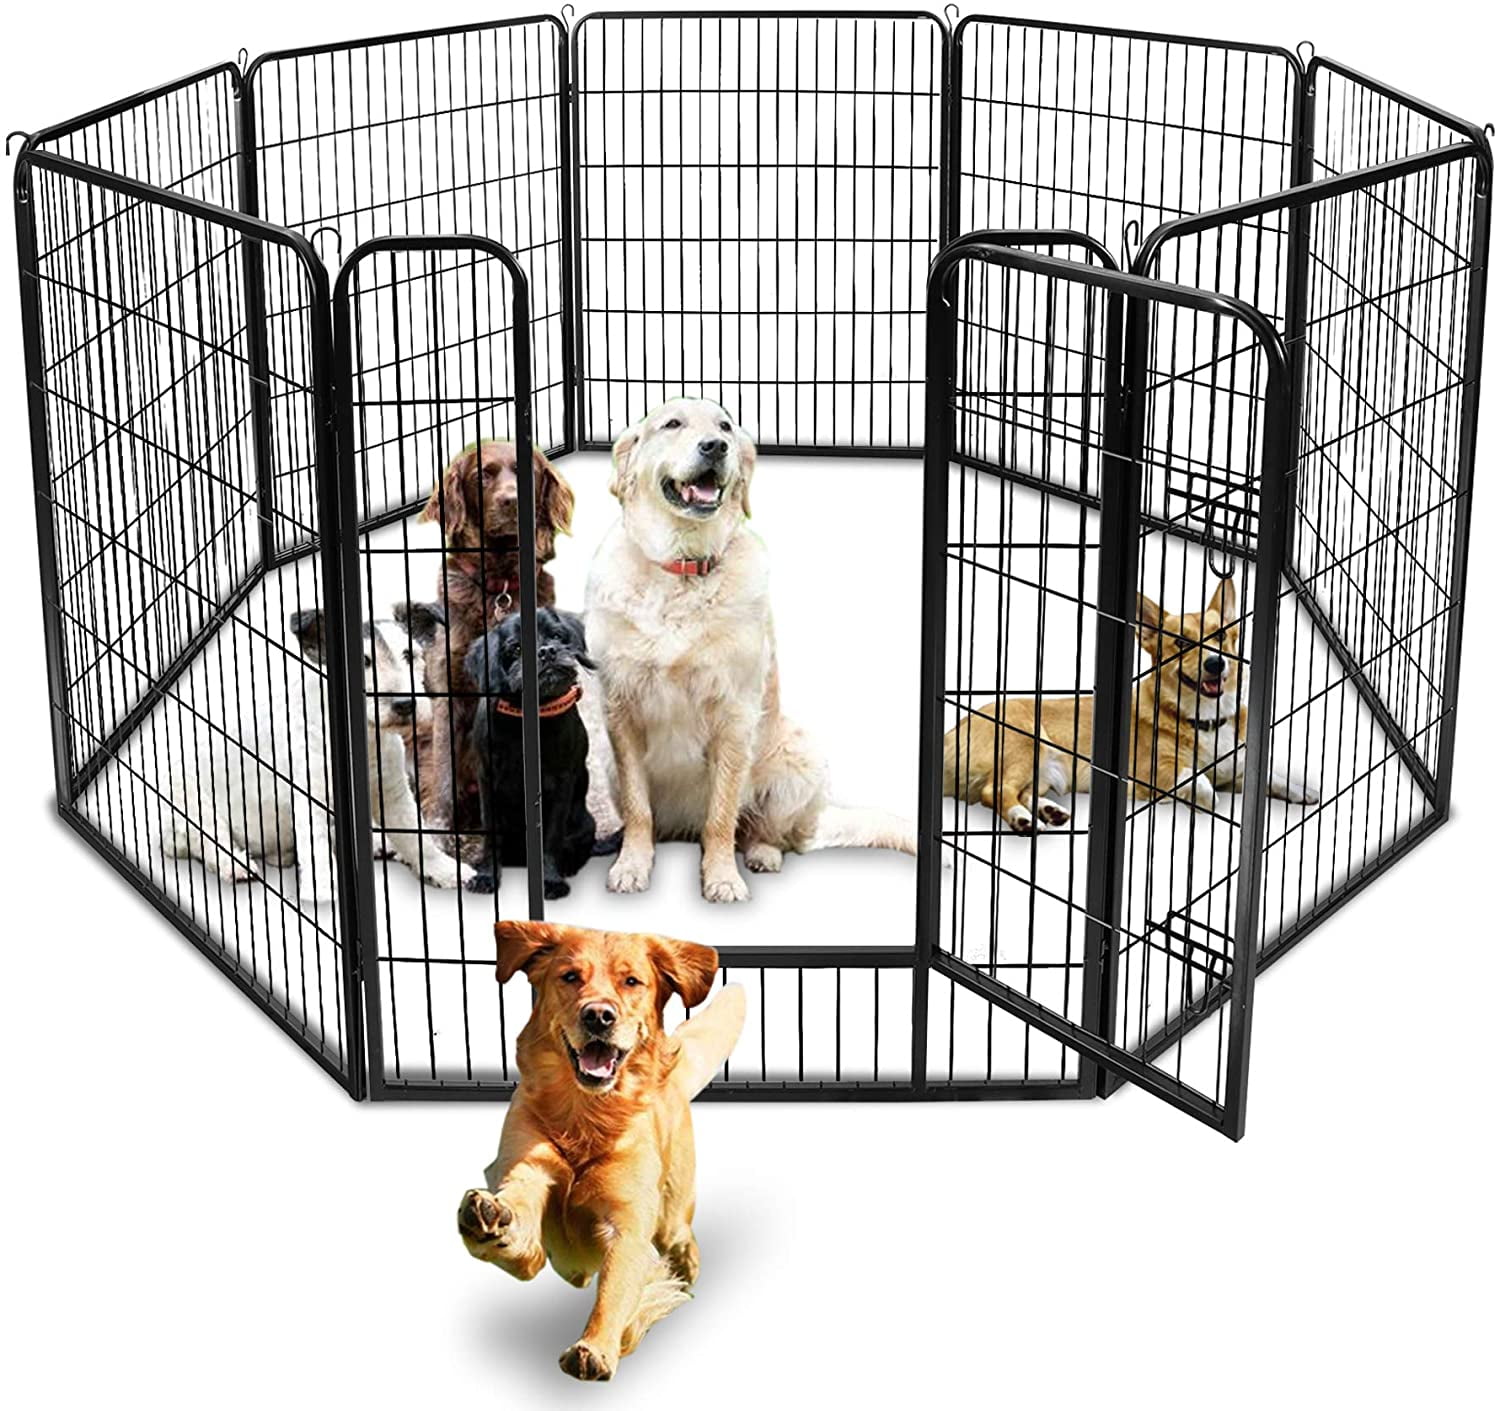 Pet Playpen For Small Dogs Puppies Indoor Outdoor Exercise Portable 4 Panel Gate 